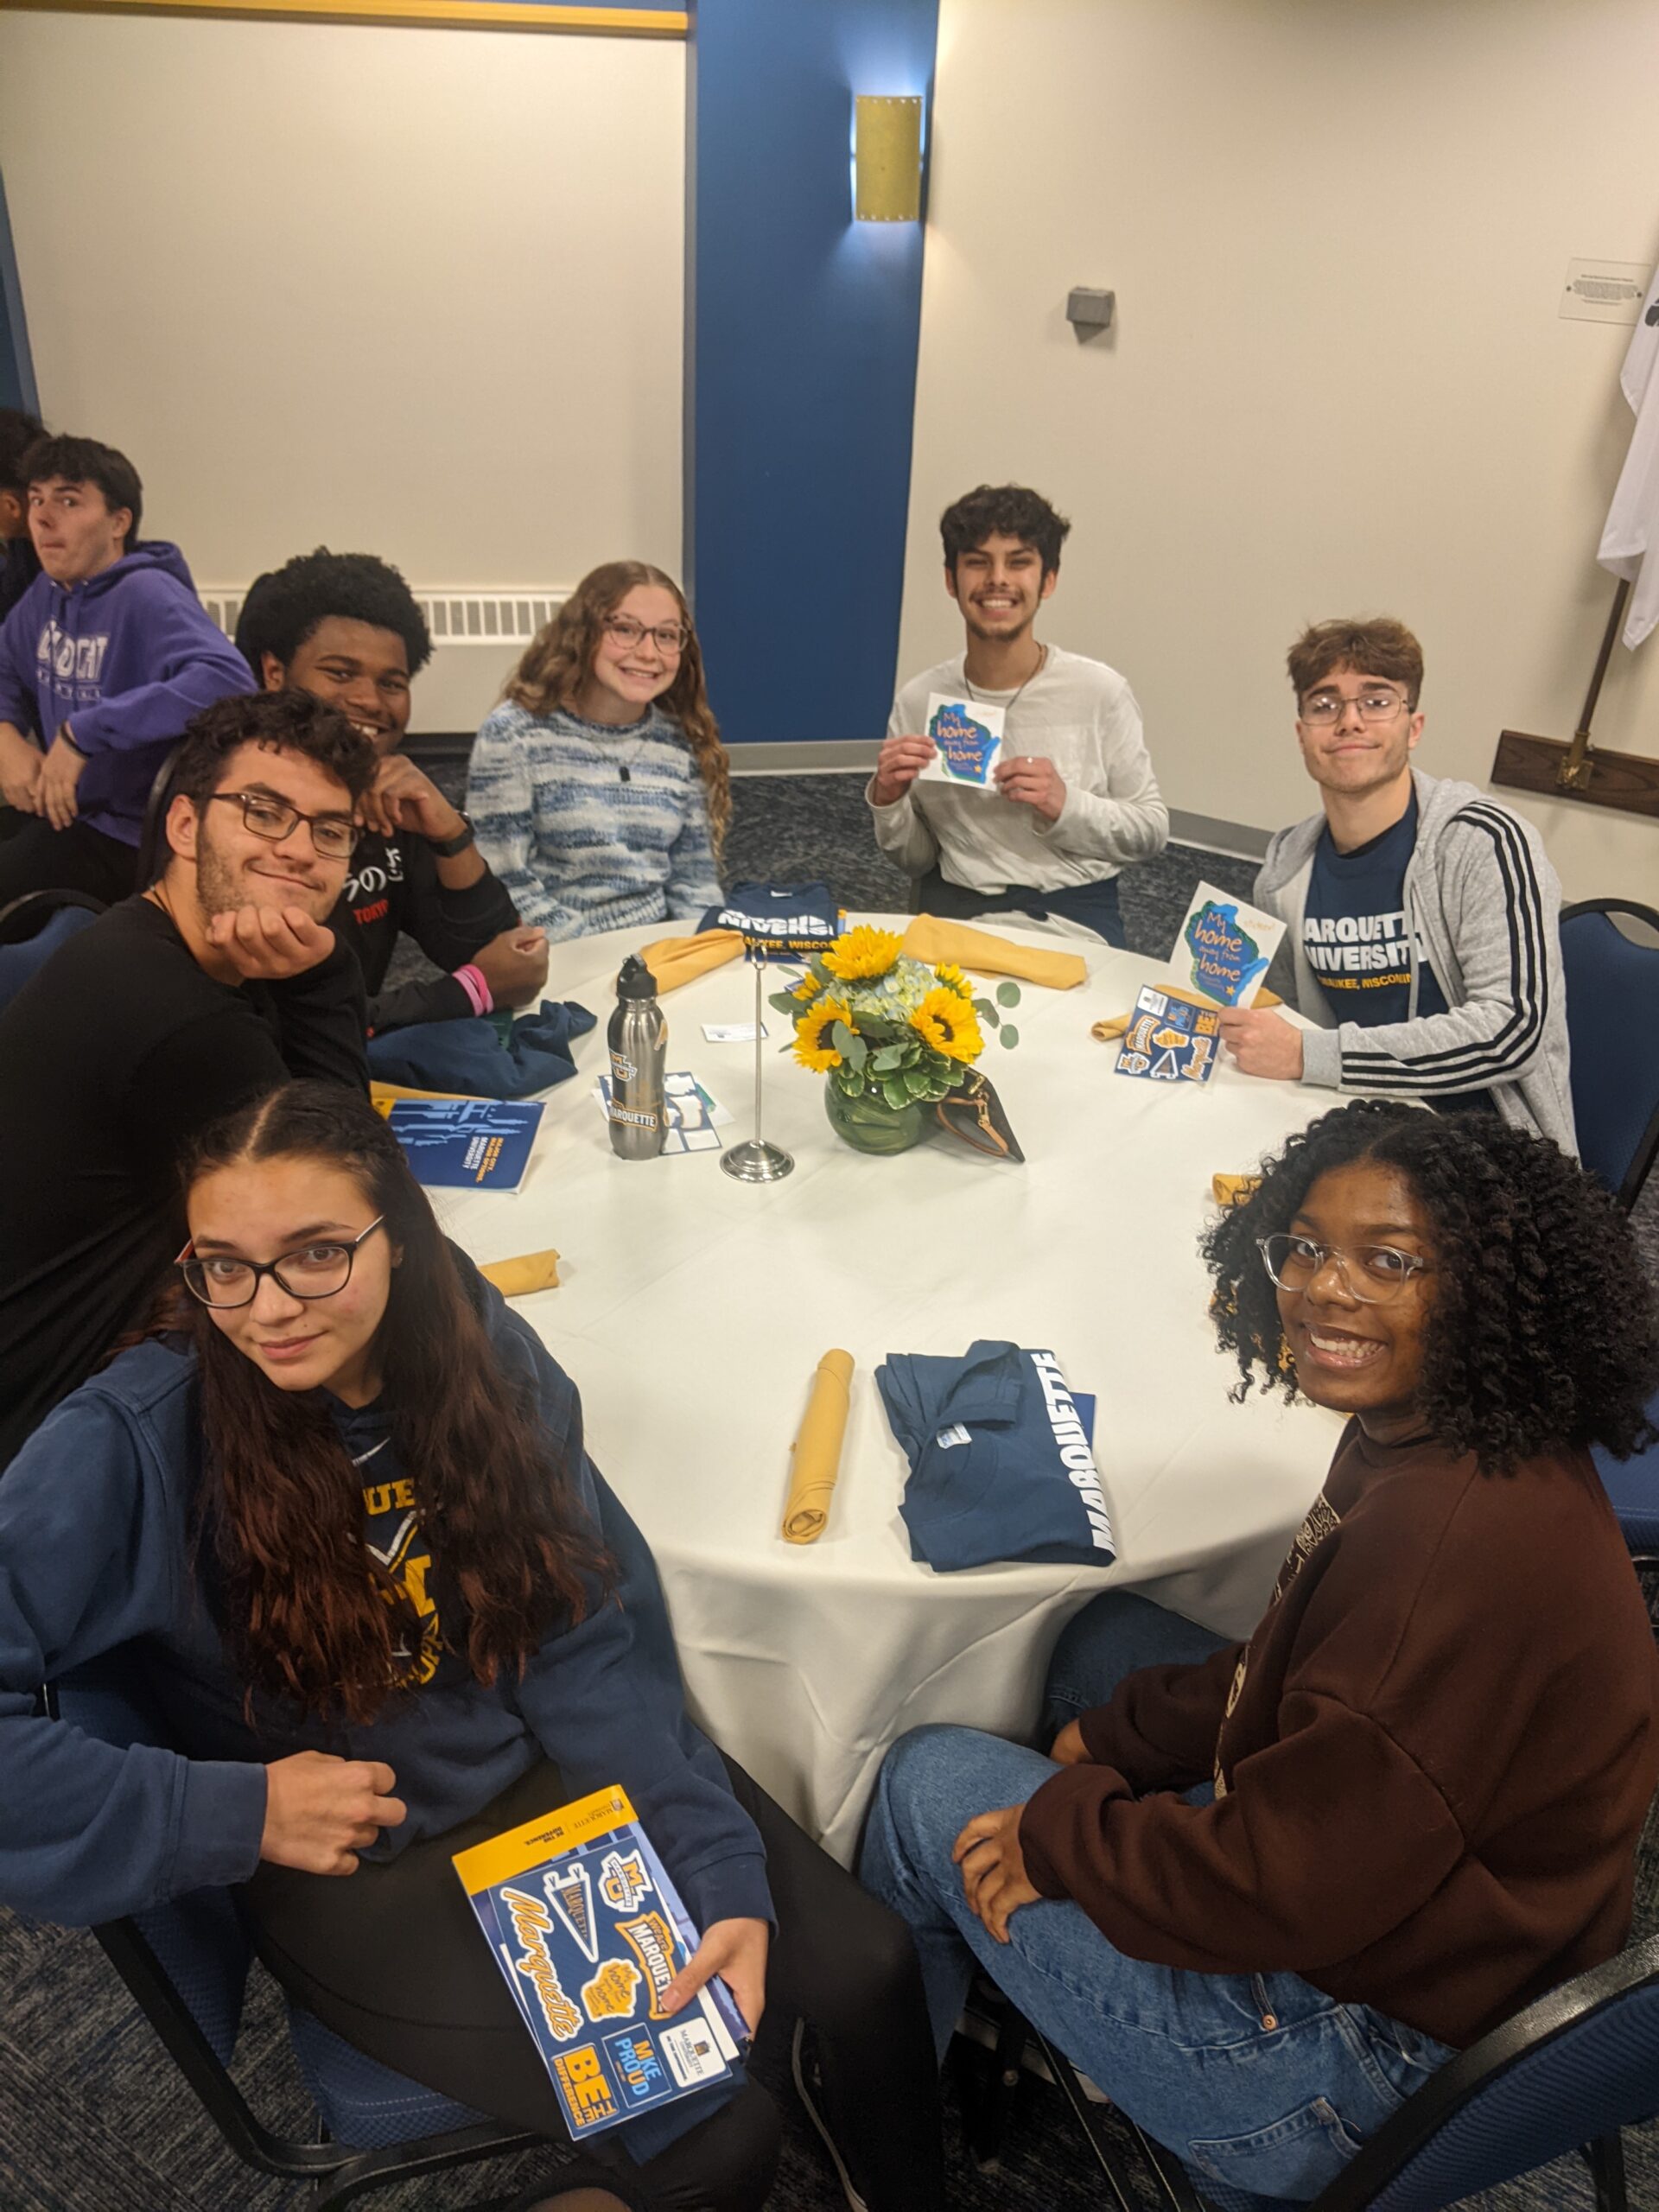 Students with Marquette University merch during fall tour.